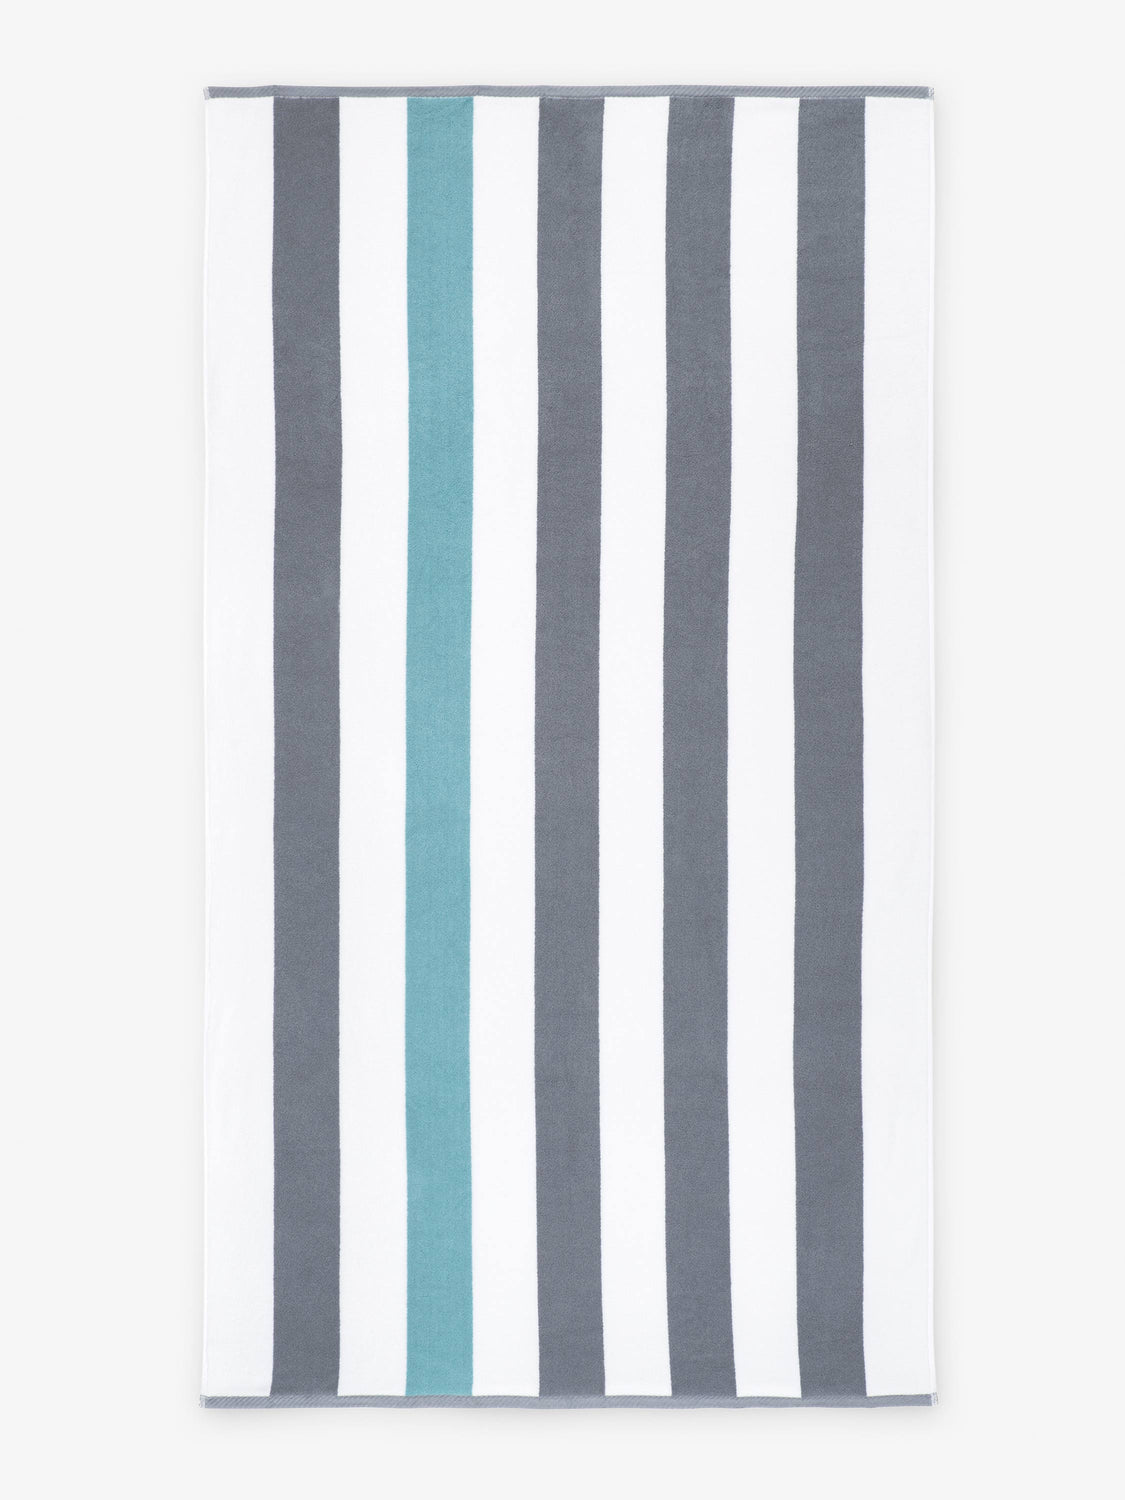 An oversized, gray, green, and white striped cabana beach towel laid out.